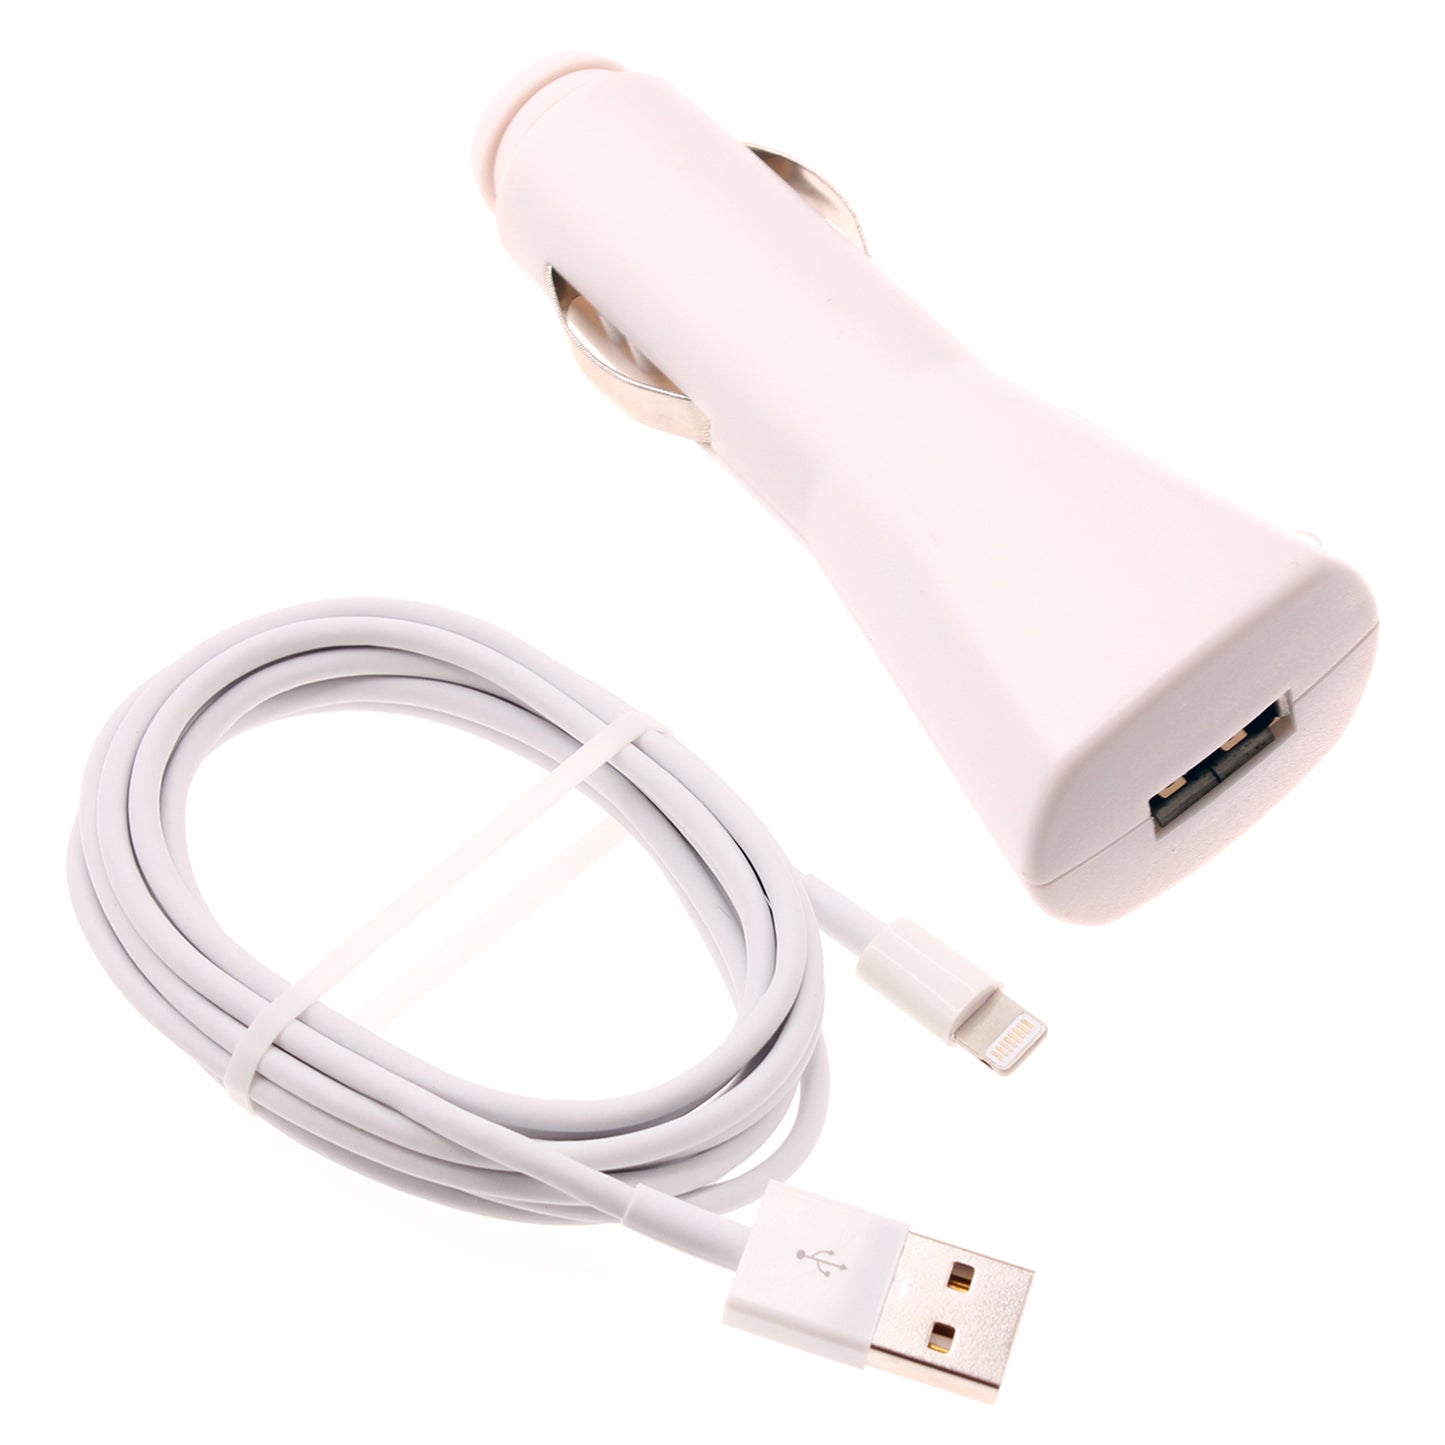 Car Charger 6ft USB Cable Long Cord Charging Wire DC Socket Power Adapter Plug-in - ONY30